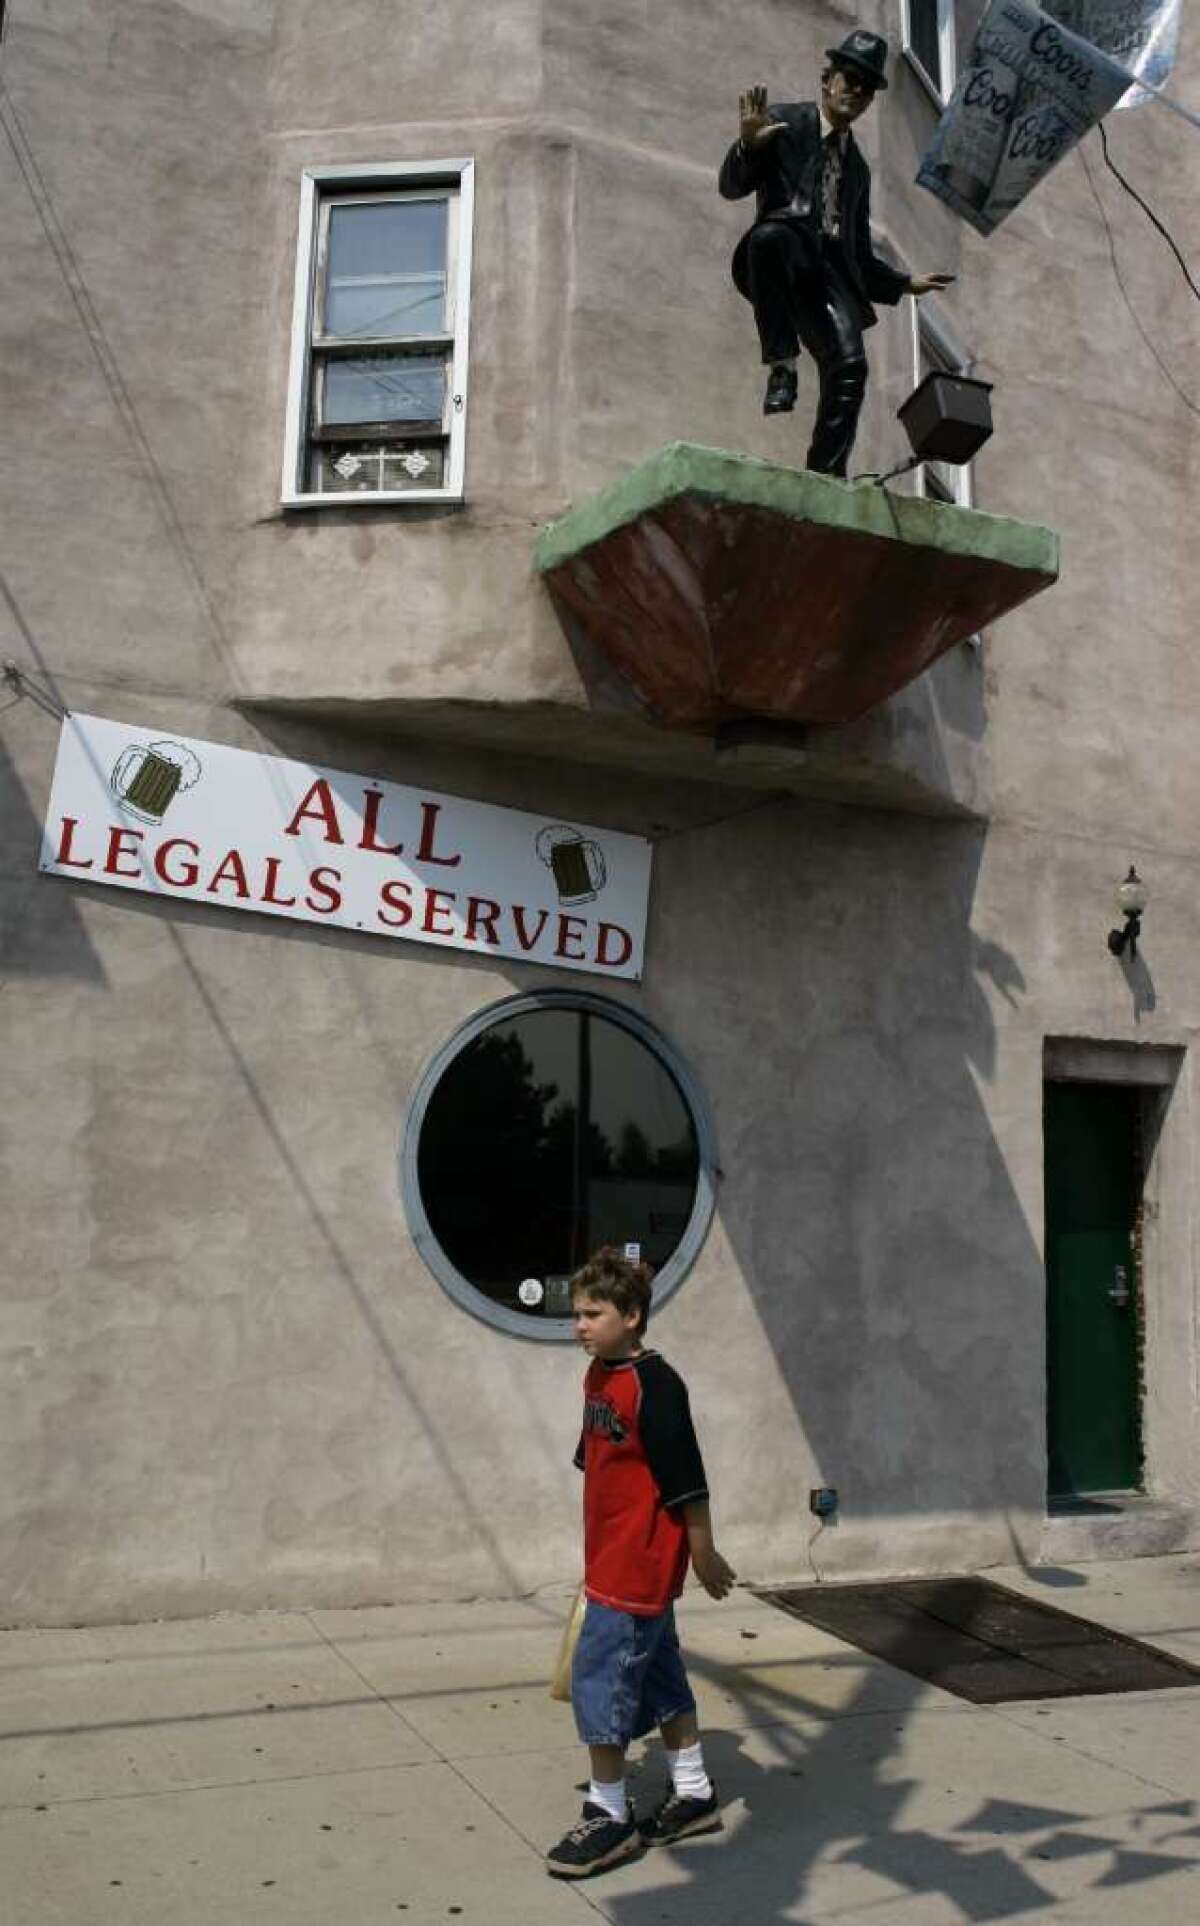 A boy walks past a bar in Hazleton, Pa., as it displays a sign on that reads "ALL Legals Served." The city is asking the U.S. Supreme Court to review lower-court decisions that invalidated its 2006 ordinance discouraging the hiring or housing of undocumented immigrants.